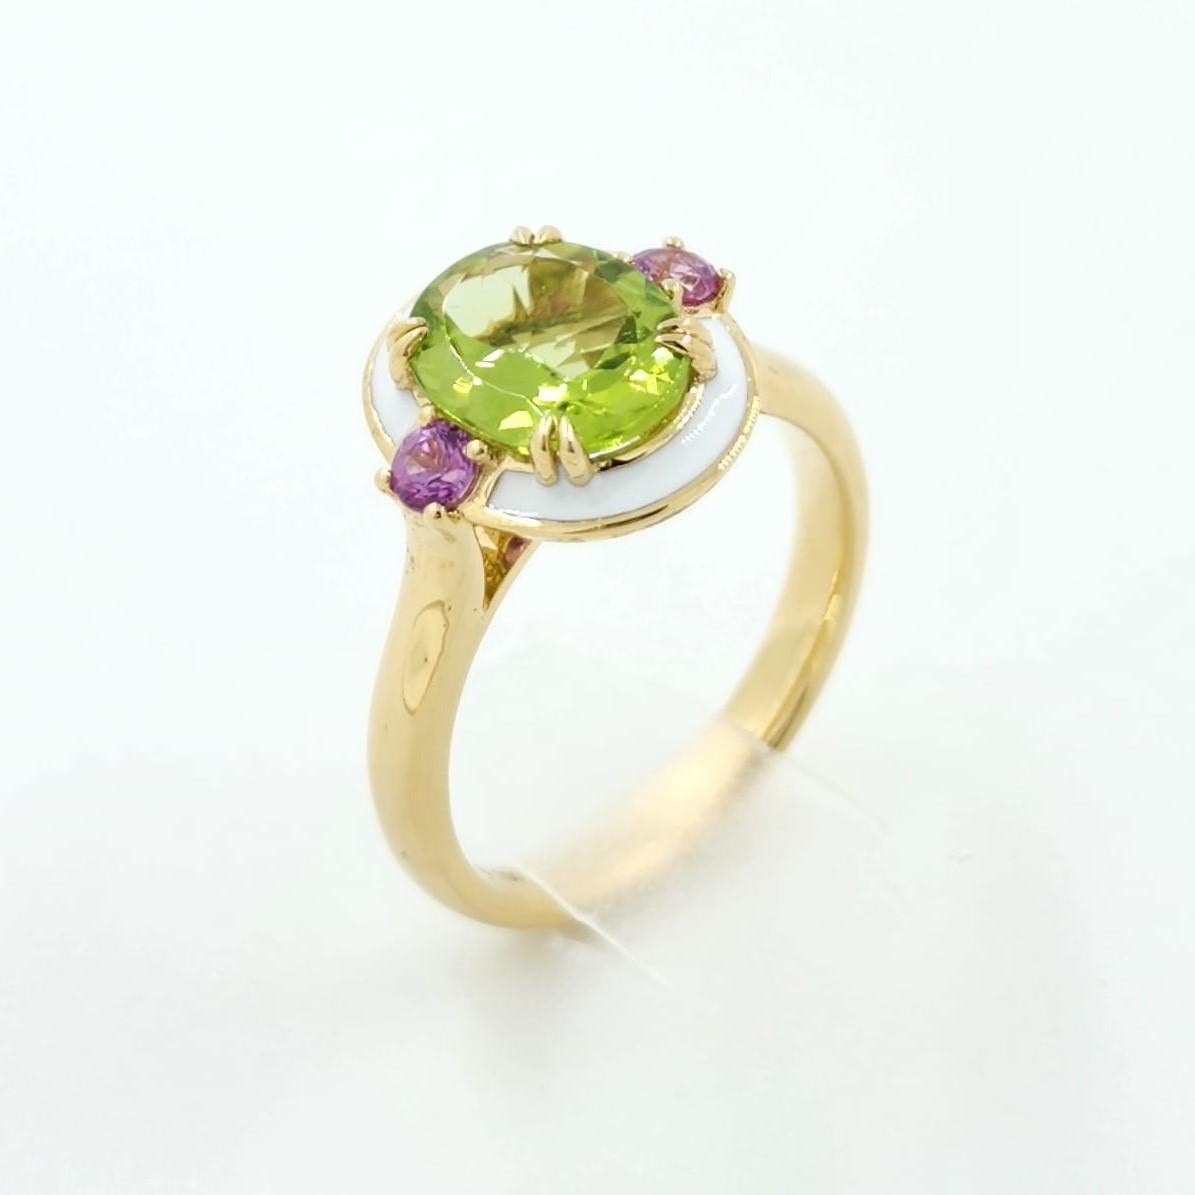 Oval Cut 1.88 Carat Peridot Enamel Art Deco Cocktail Ring in 18k Yellow Gold For Sale